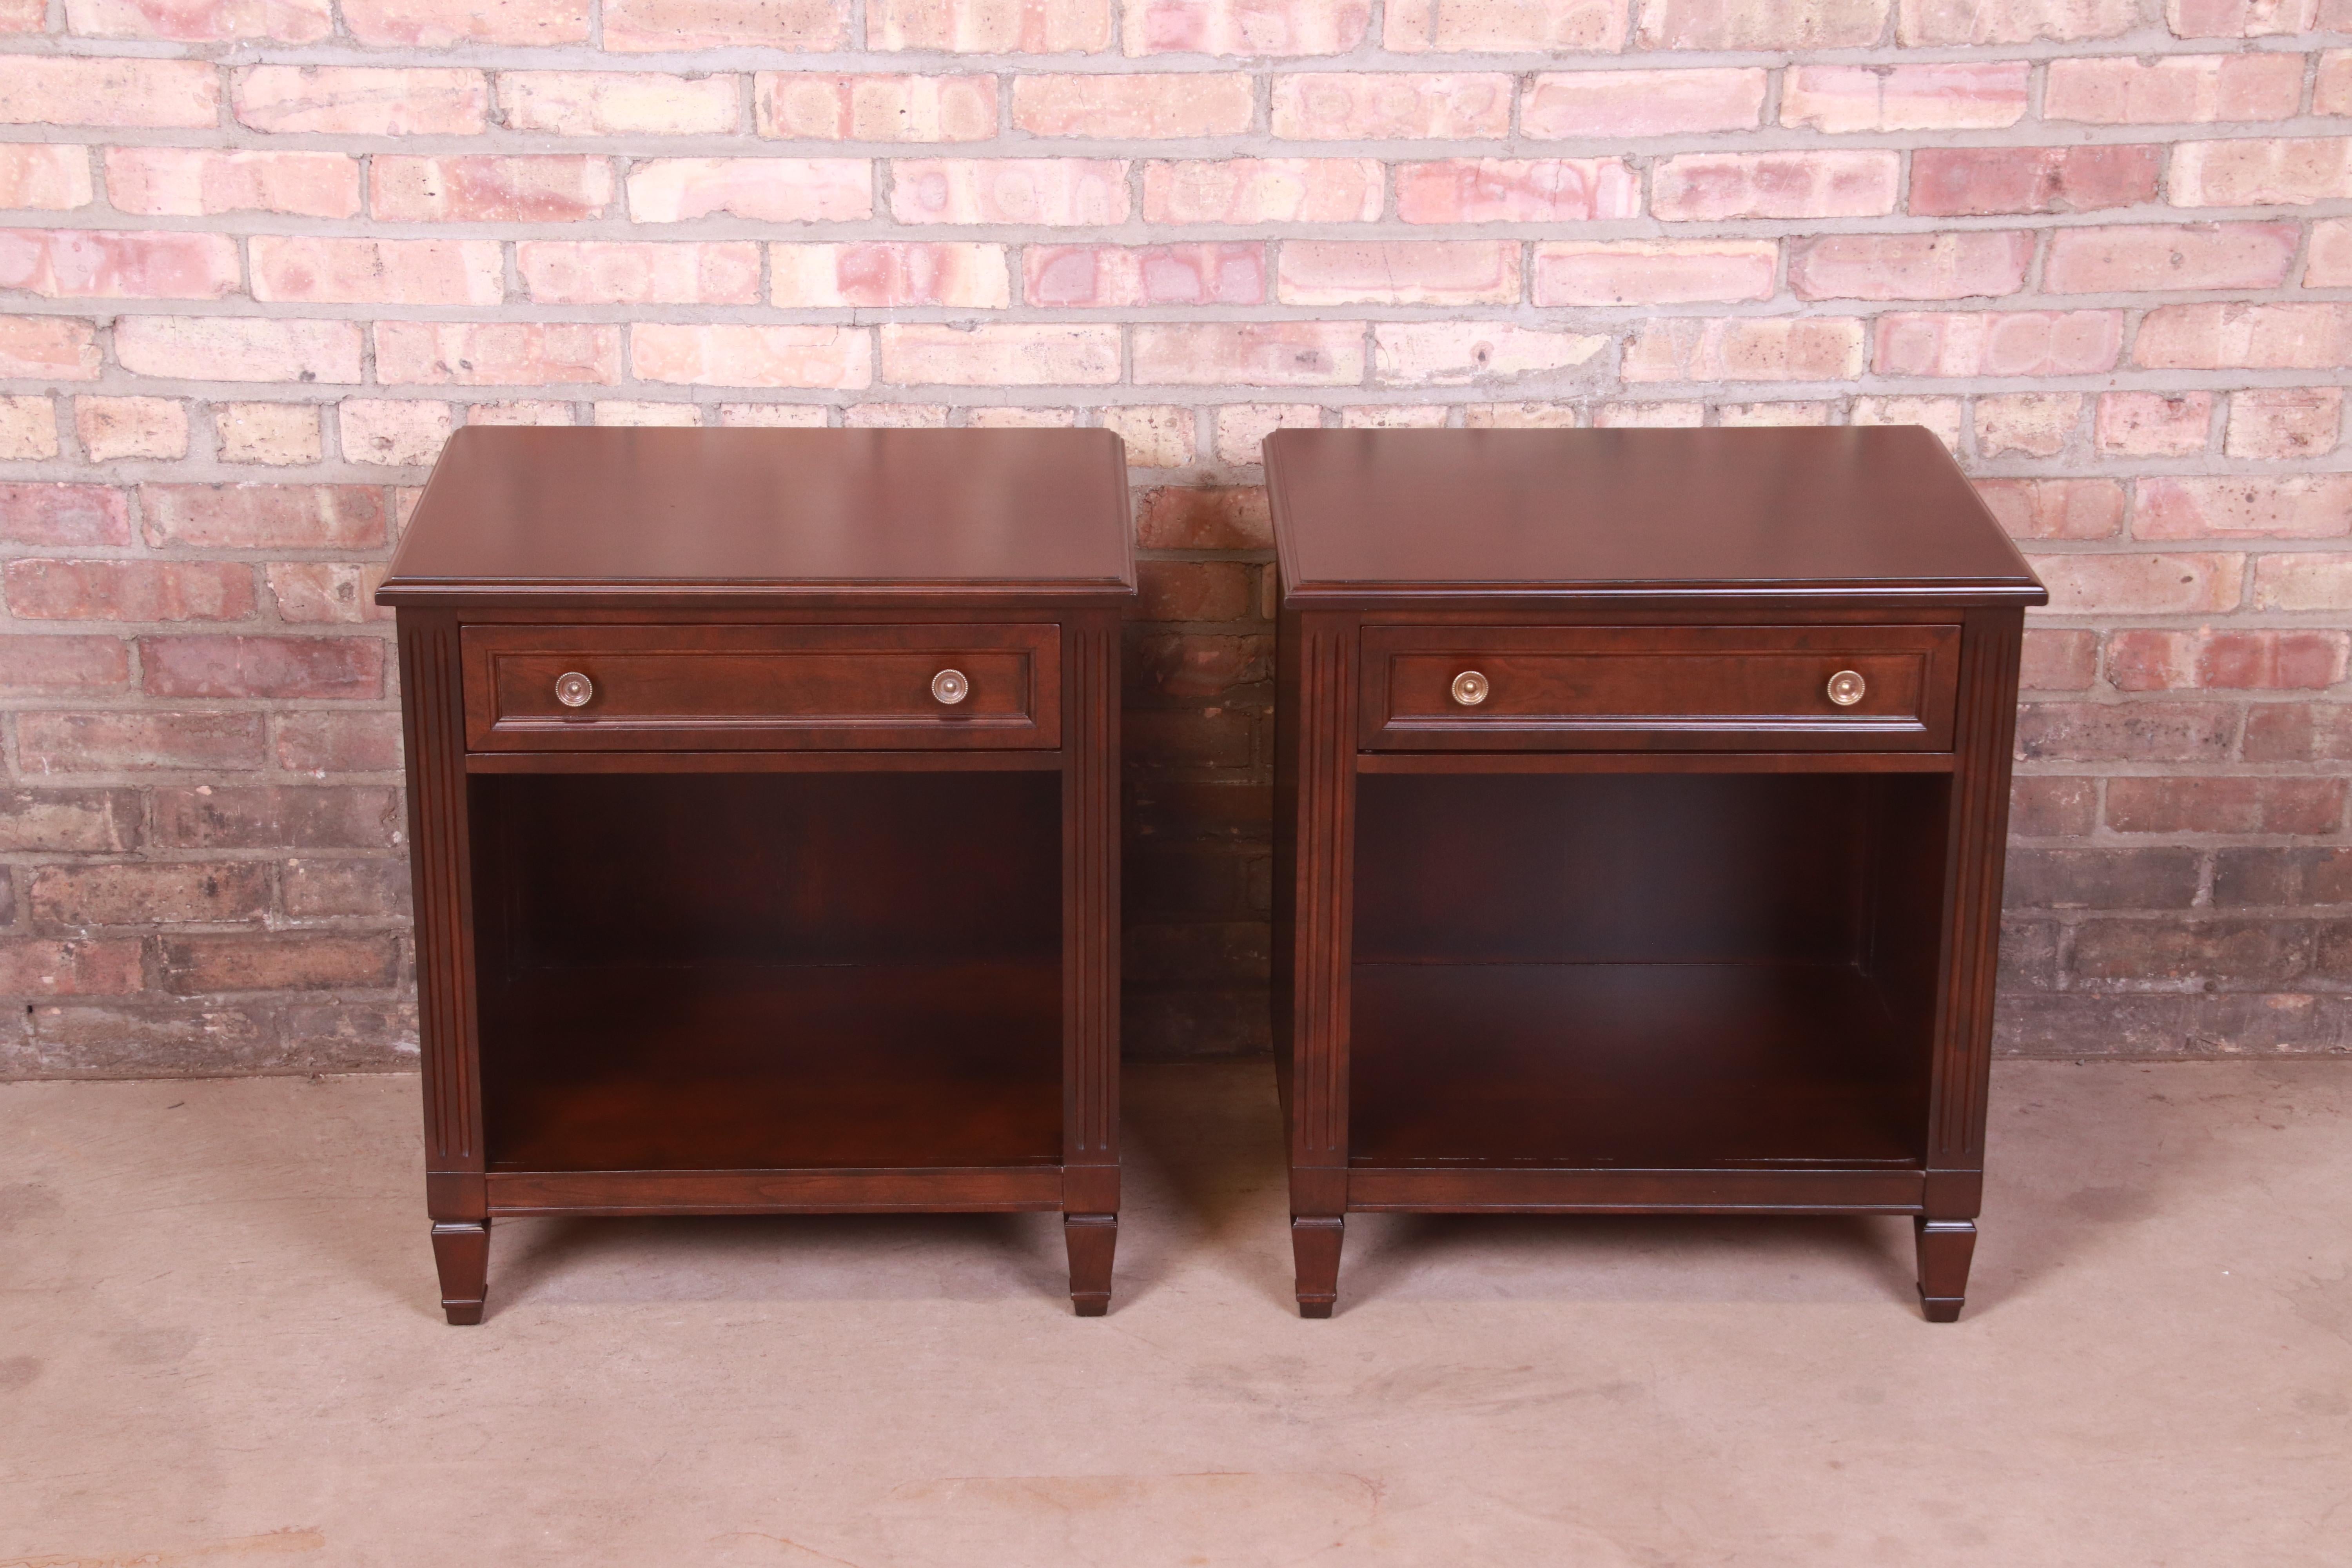 American Kindel Furniture French Regency Louis XVI Cherry Wood Nightstands, Refinished